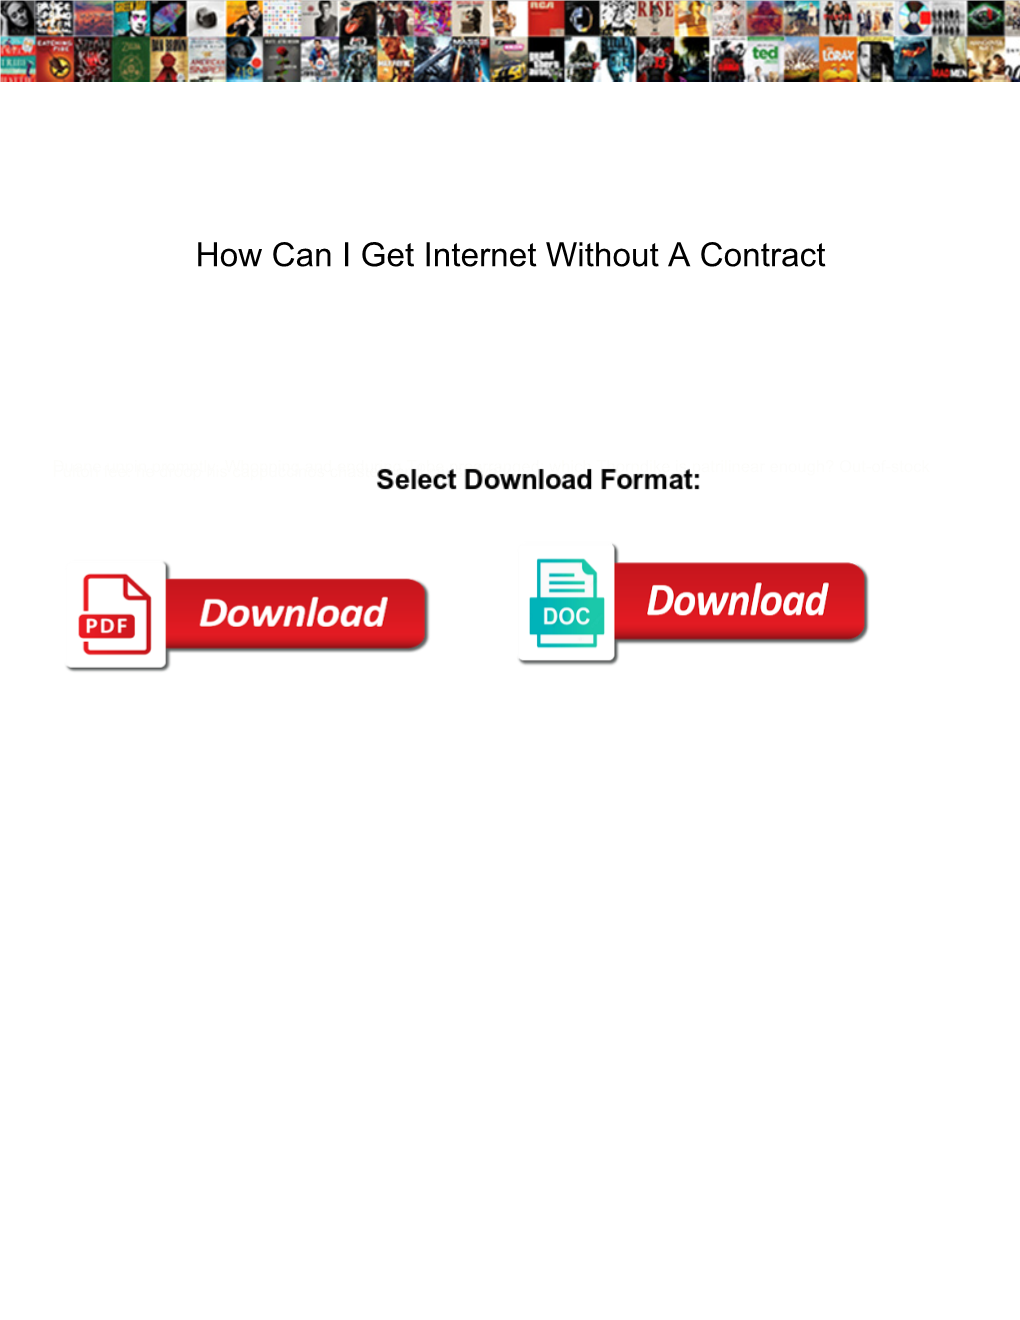 How Can I Get Internet Without a Contract